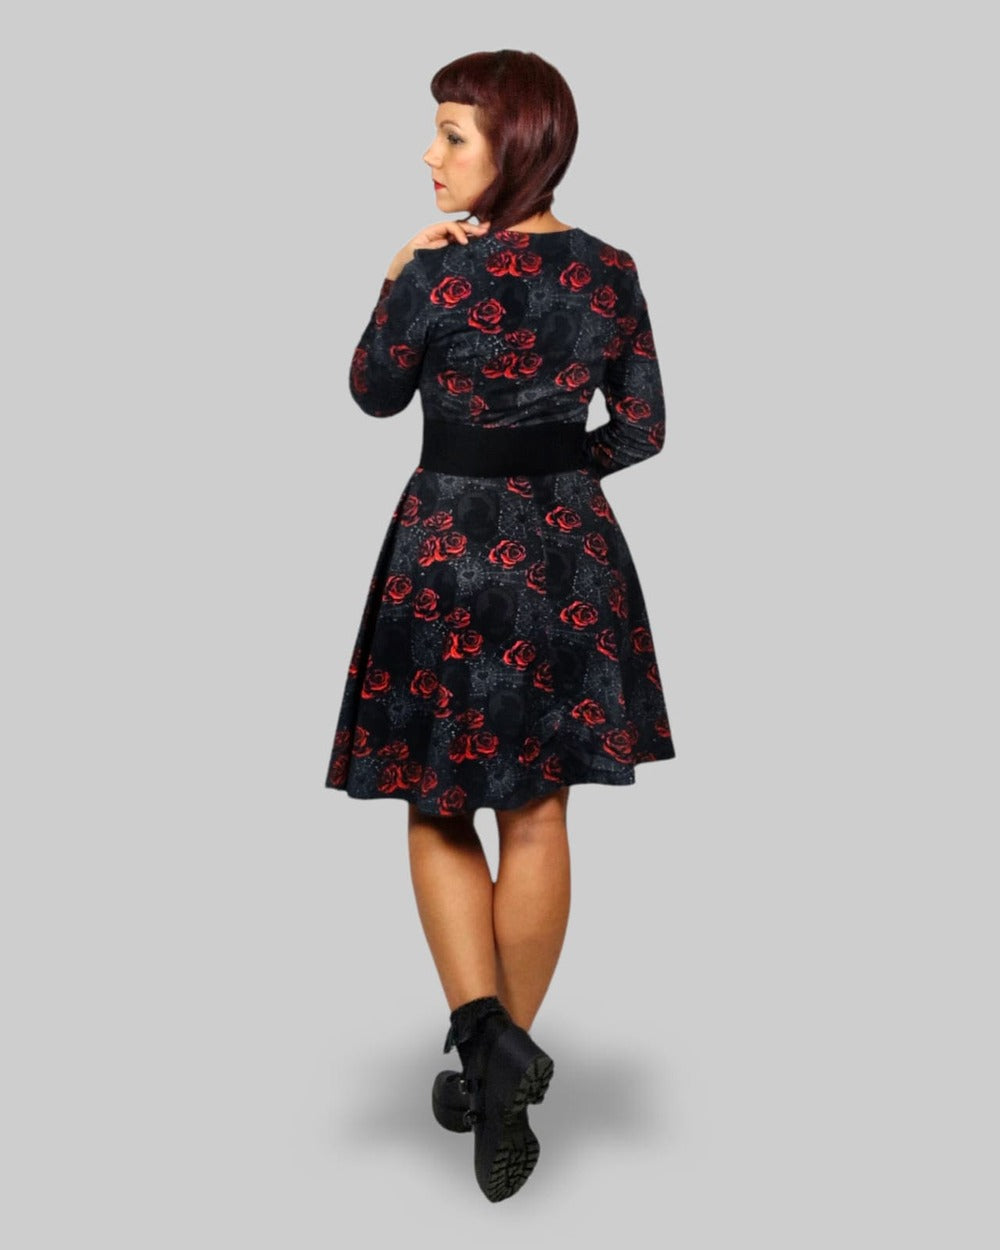 2XL-3XL - Goth Cats & Roses  - Oslo Dress - Easy Fit & Natural Fabric - last sizes